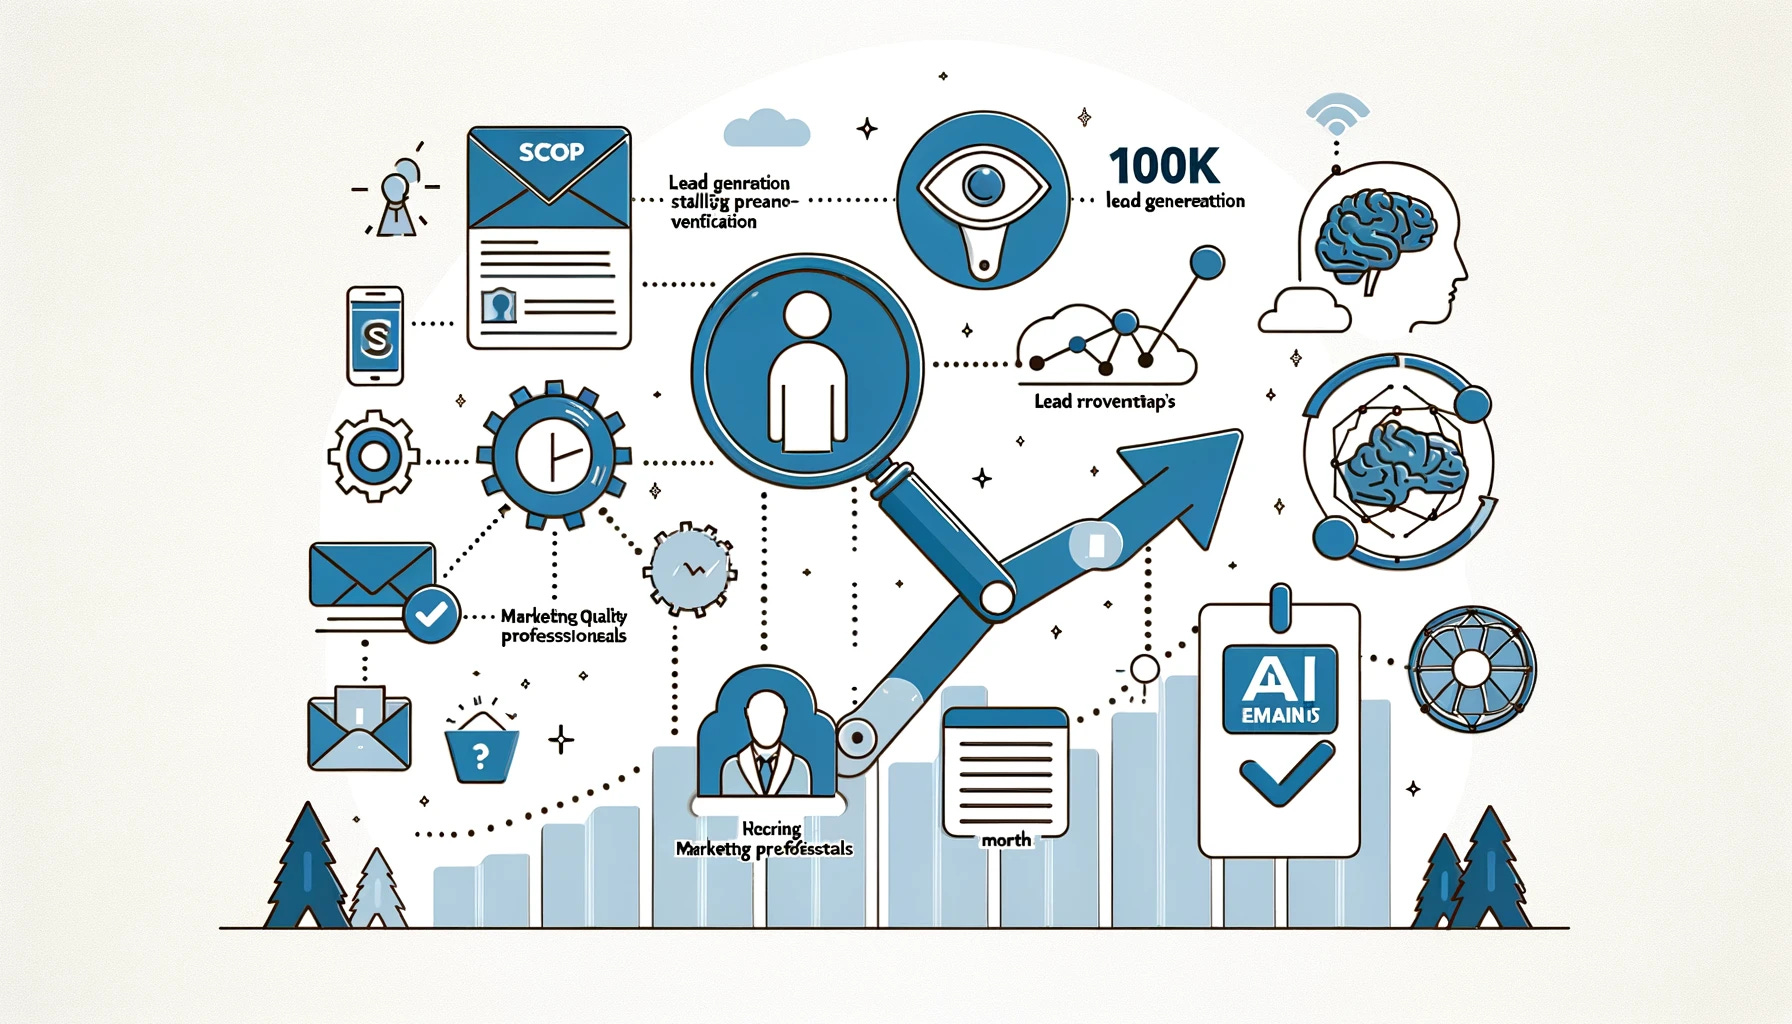 A very simple minimalistic illustration representing the launch of the new version of Scop Plus on a white background. Include icons such as a magnifying glass for lead quality verification, an AI brain, and an email. Display a graph indicating 100k leads and emails per month. Show a basic depiction of a lead generation process starting from a market description like 'marketing professionals' and resulting in a growing dataset. Use a clean, modern design with a focus on efficiency and AI technology.